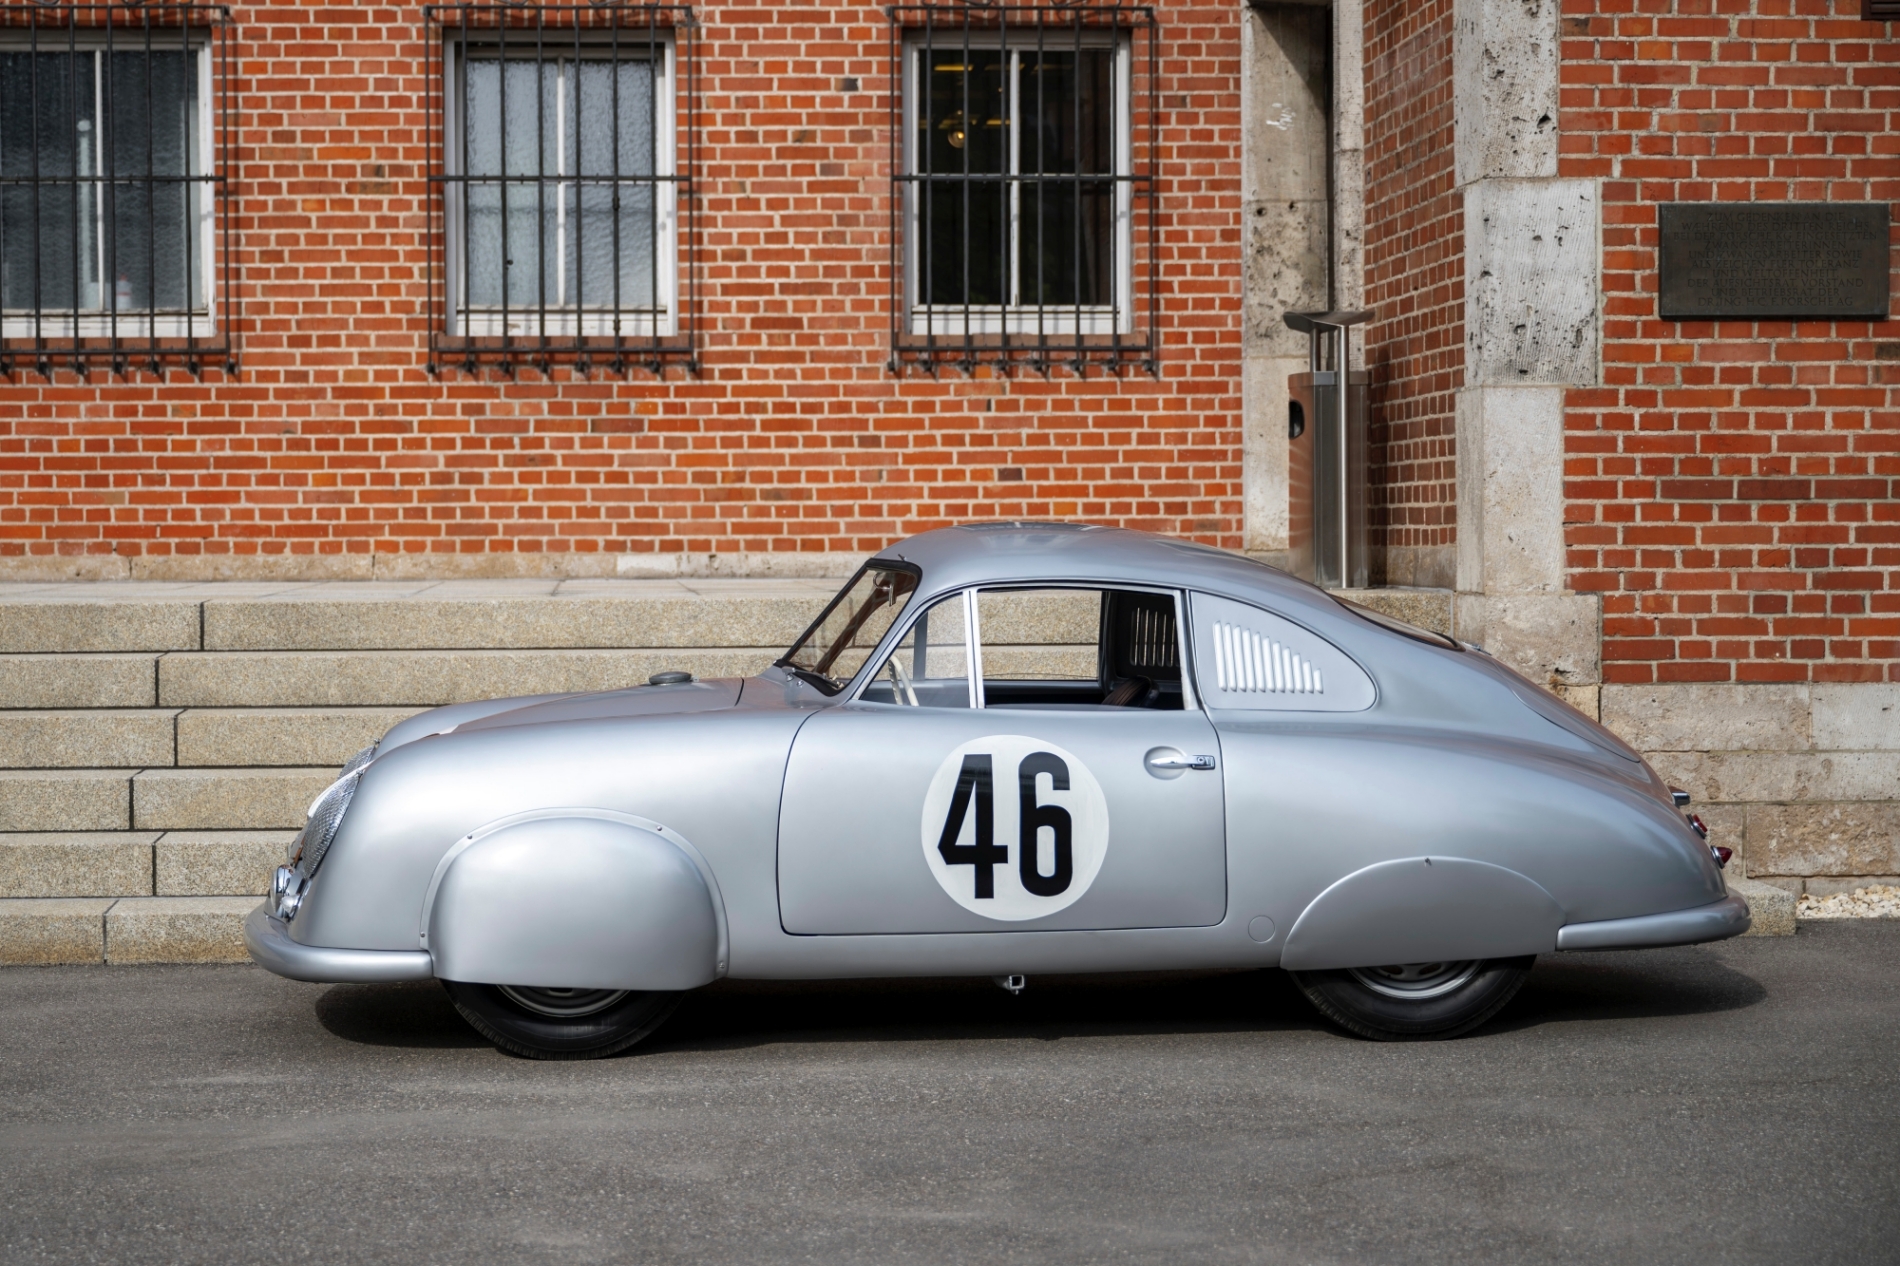 After 72 years, the Race 5 car, thought to have disappeared, has returned home